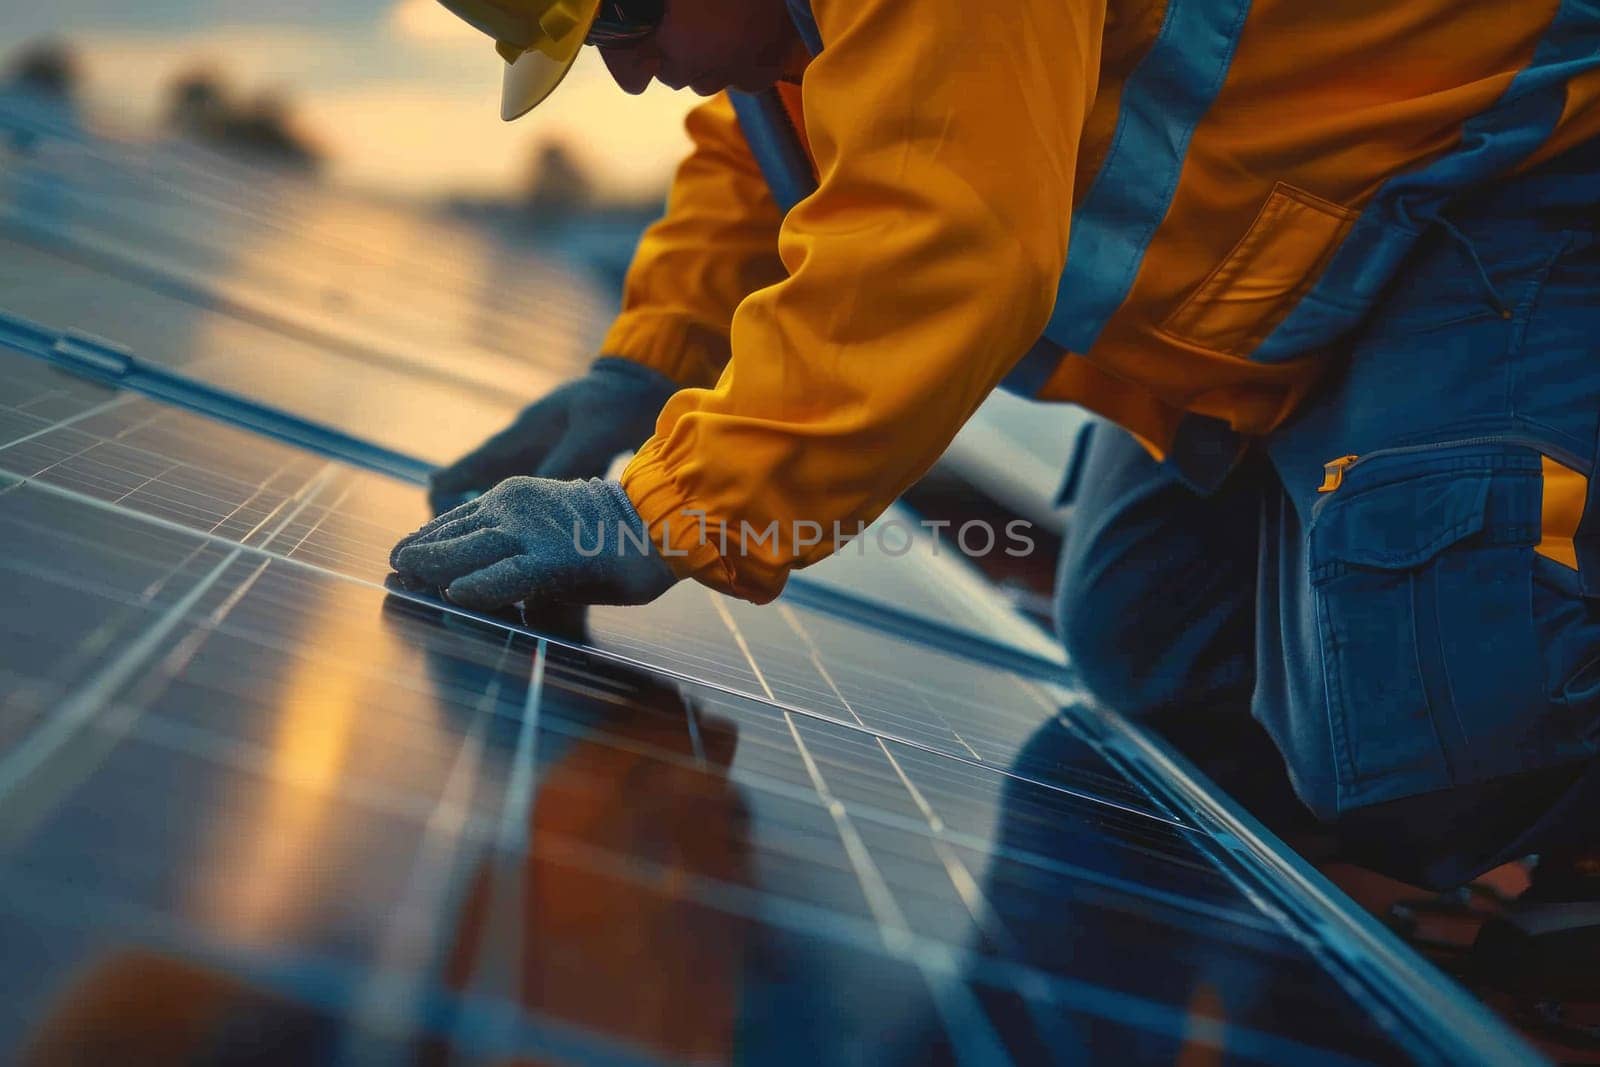 A man in orange safety gear is working on a solar panel.